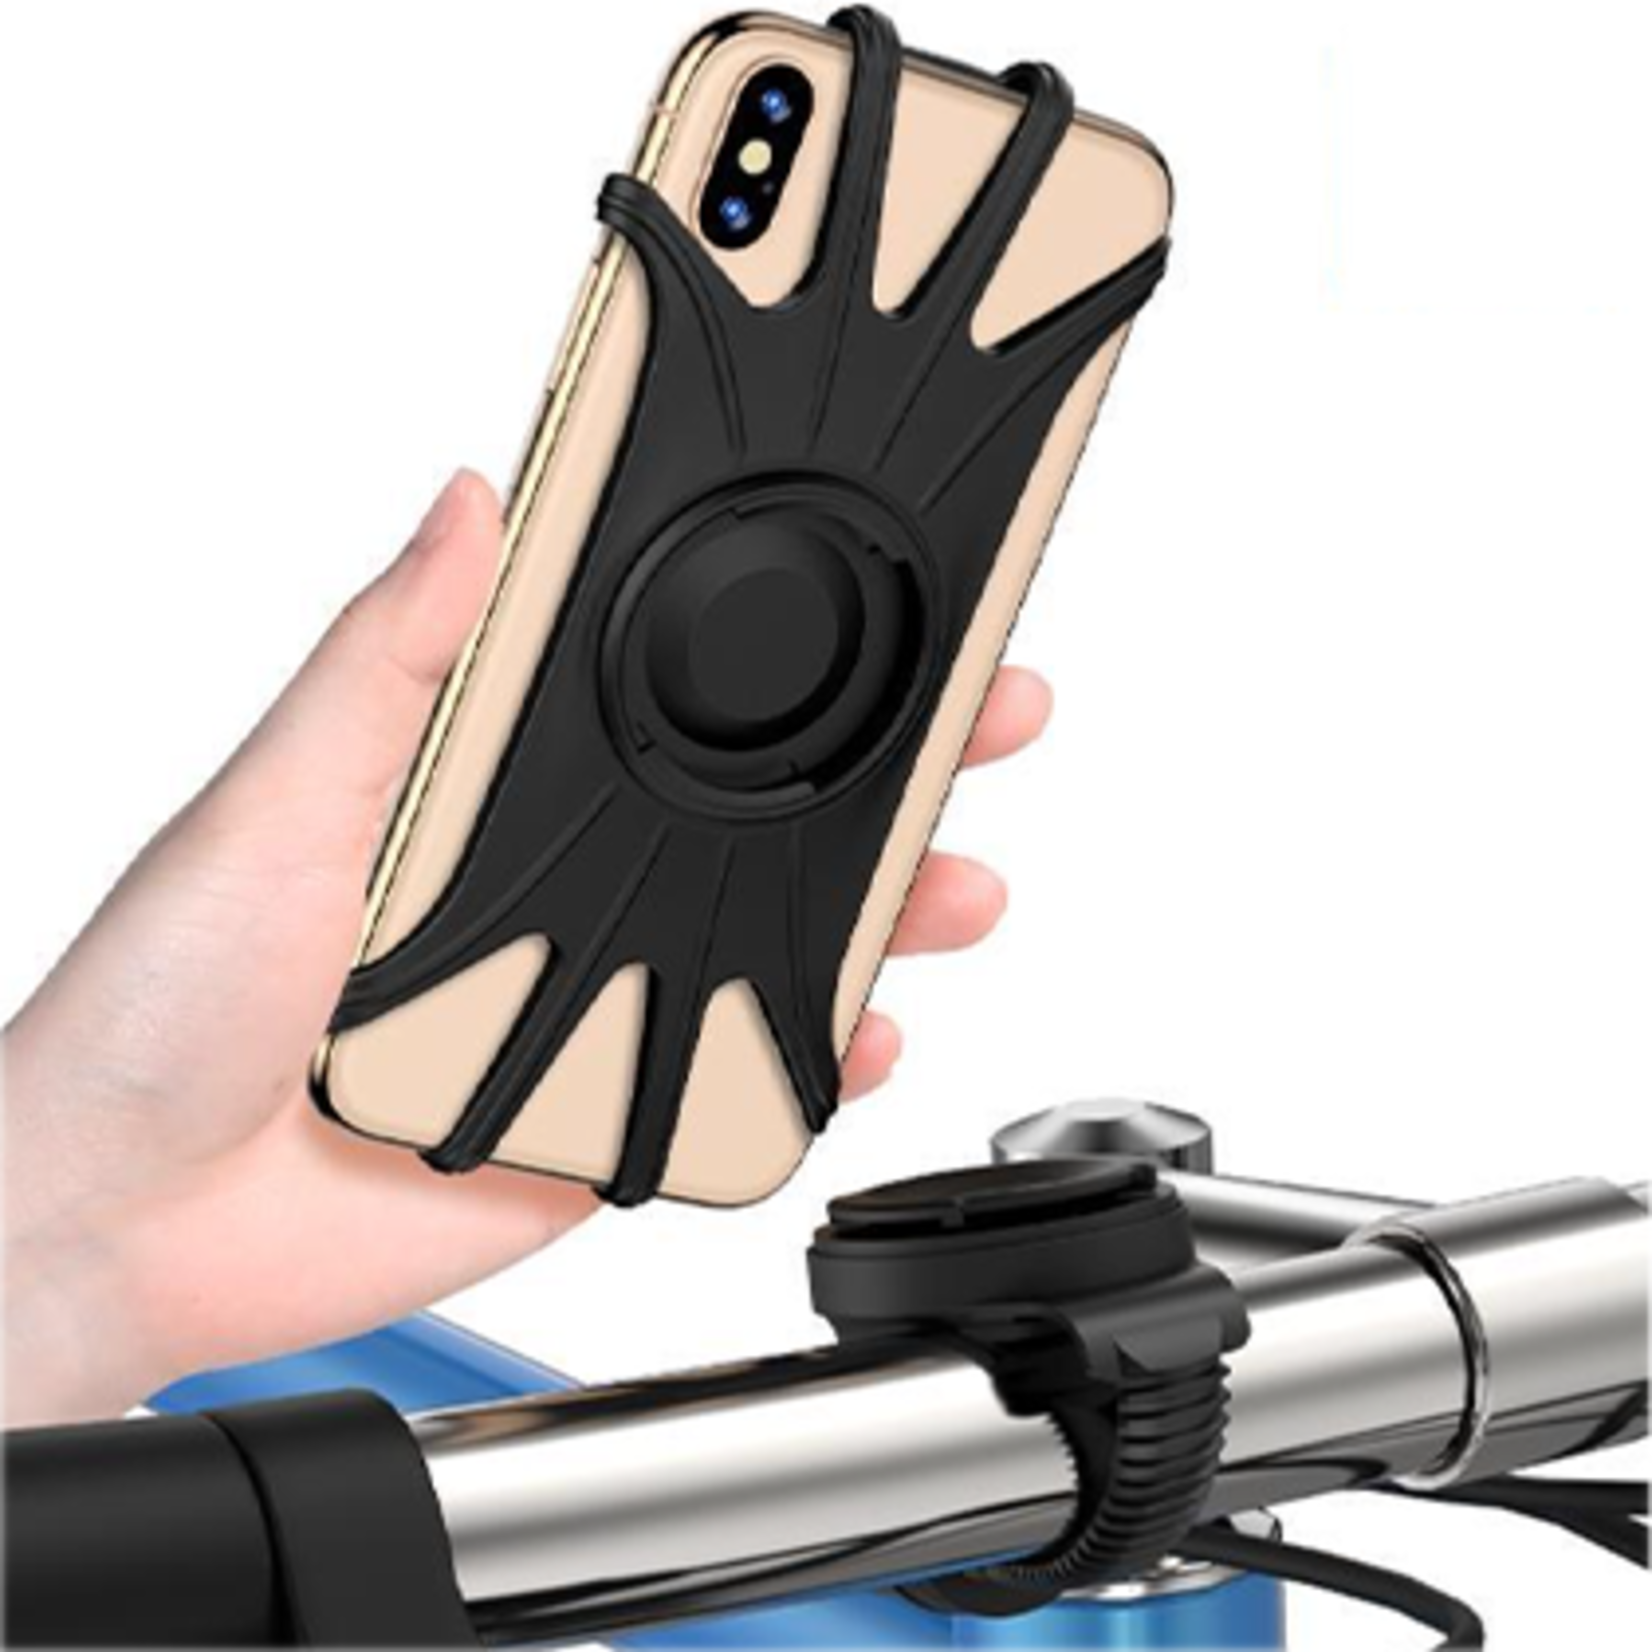 Bike Mount Phone Holder Universal Bicycle Cradle for iPhone Galaxy (4 - 6.5 inch phones)